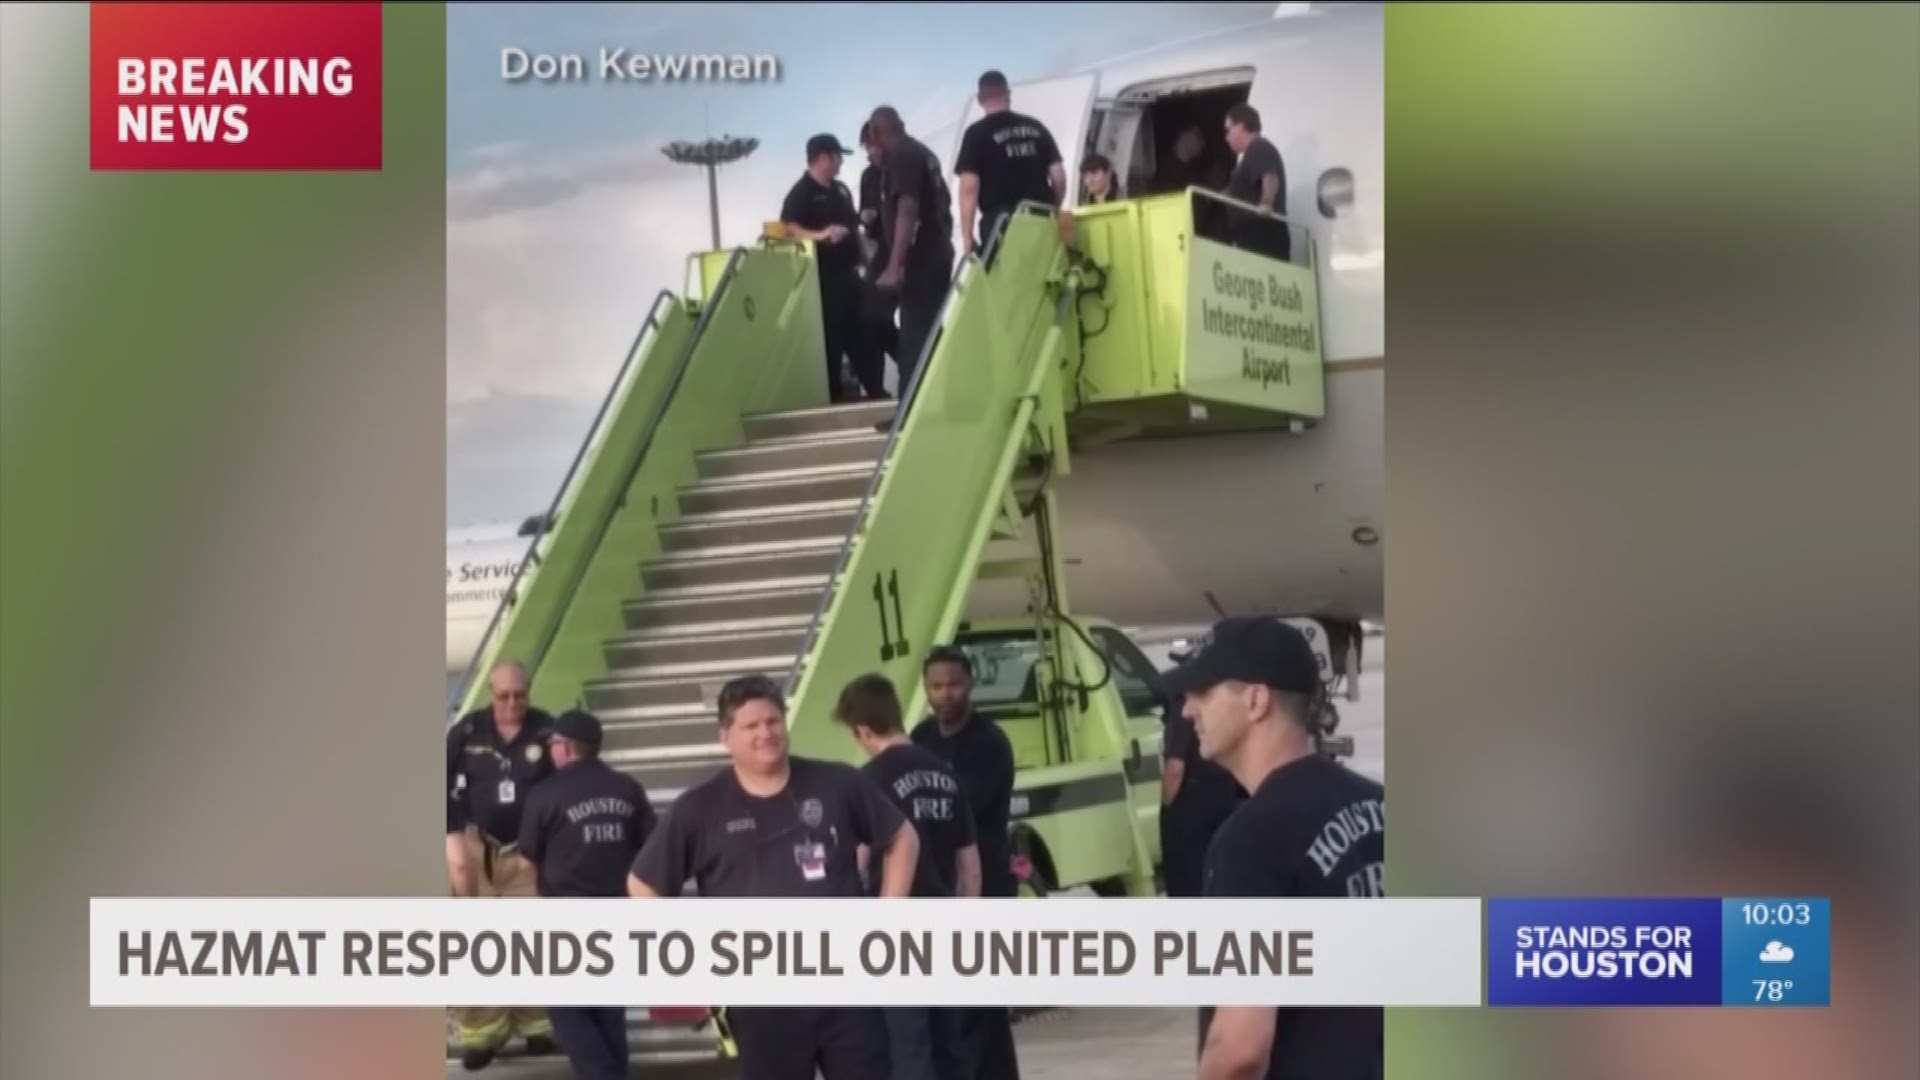 The incident happened on a United Airlines flight from Sacramento to Houston Friday night.